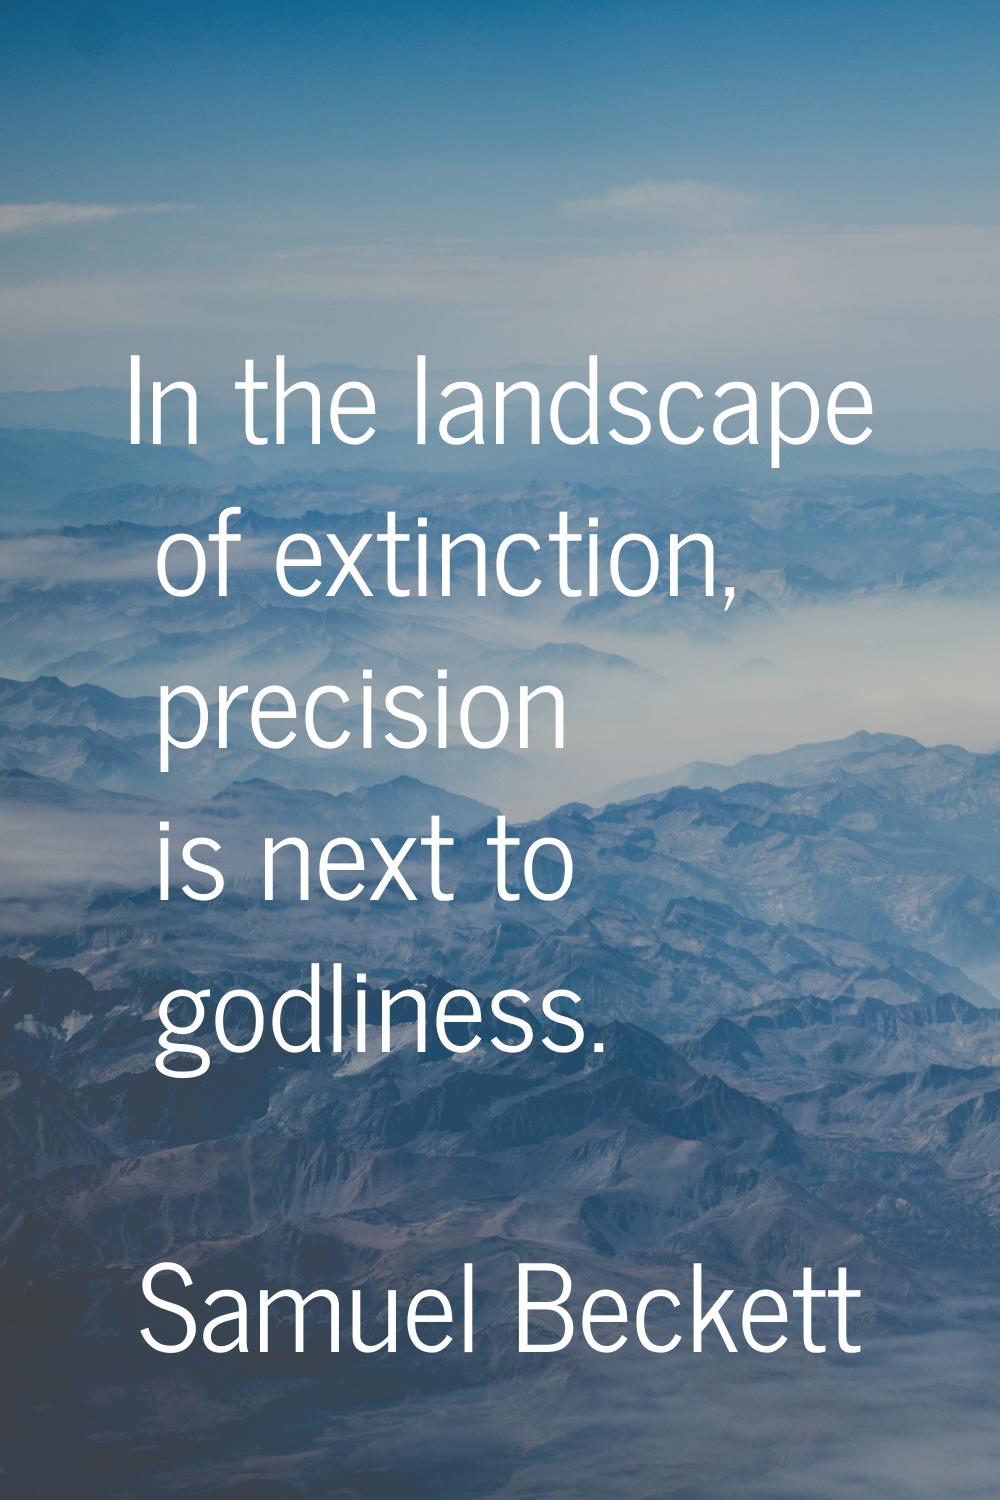 In the landscape of extinction, precision is next to godliness.